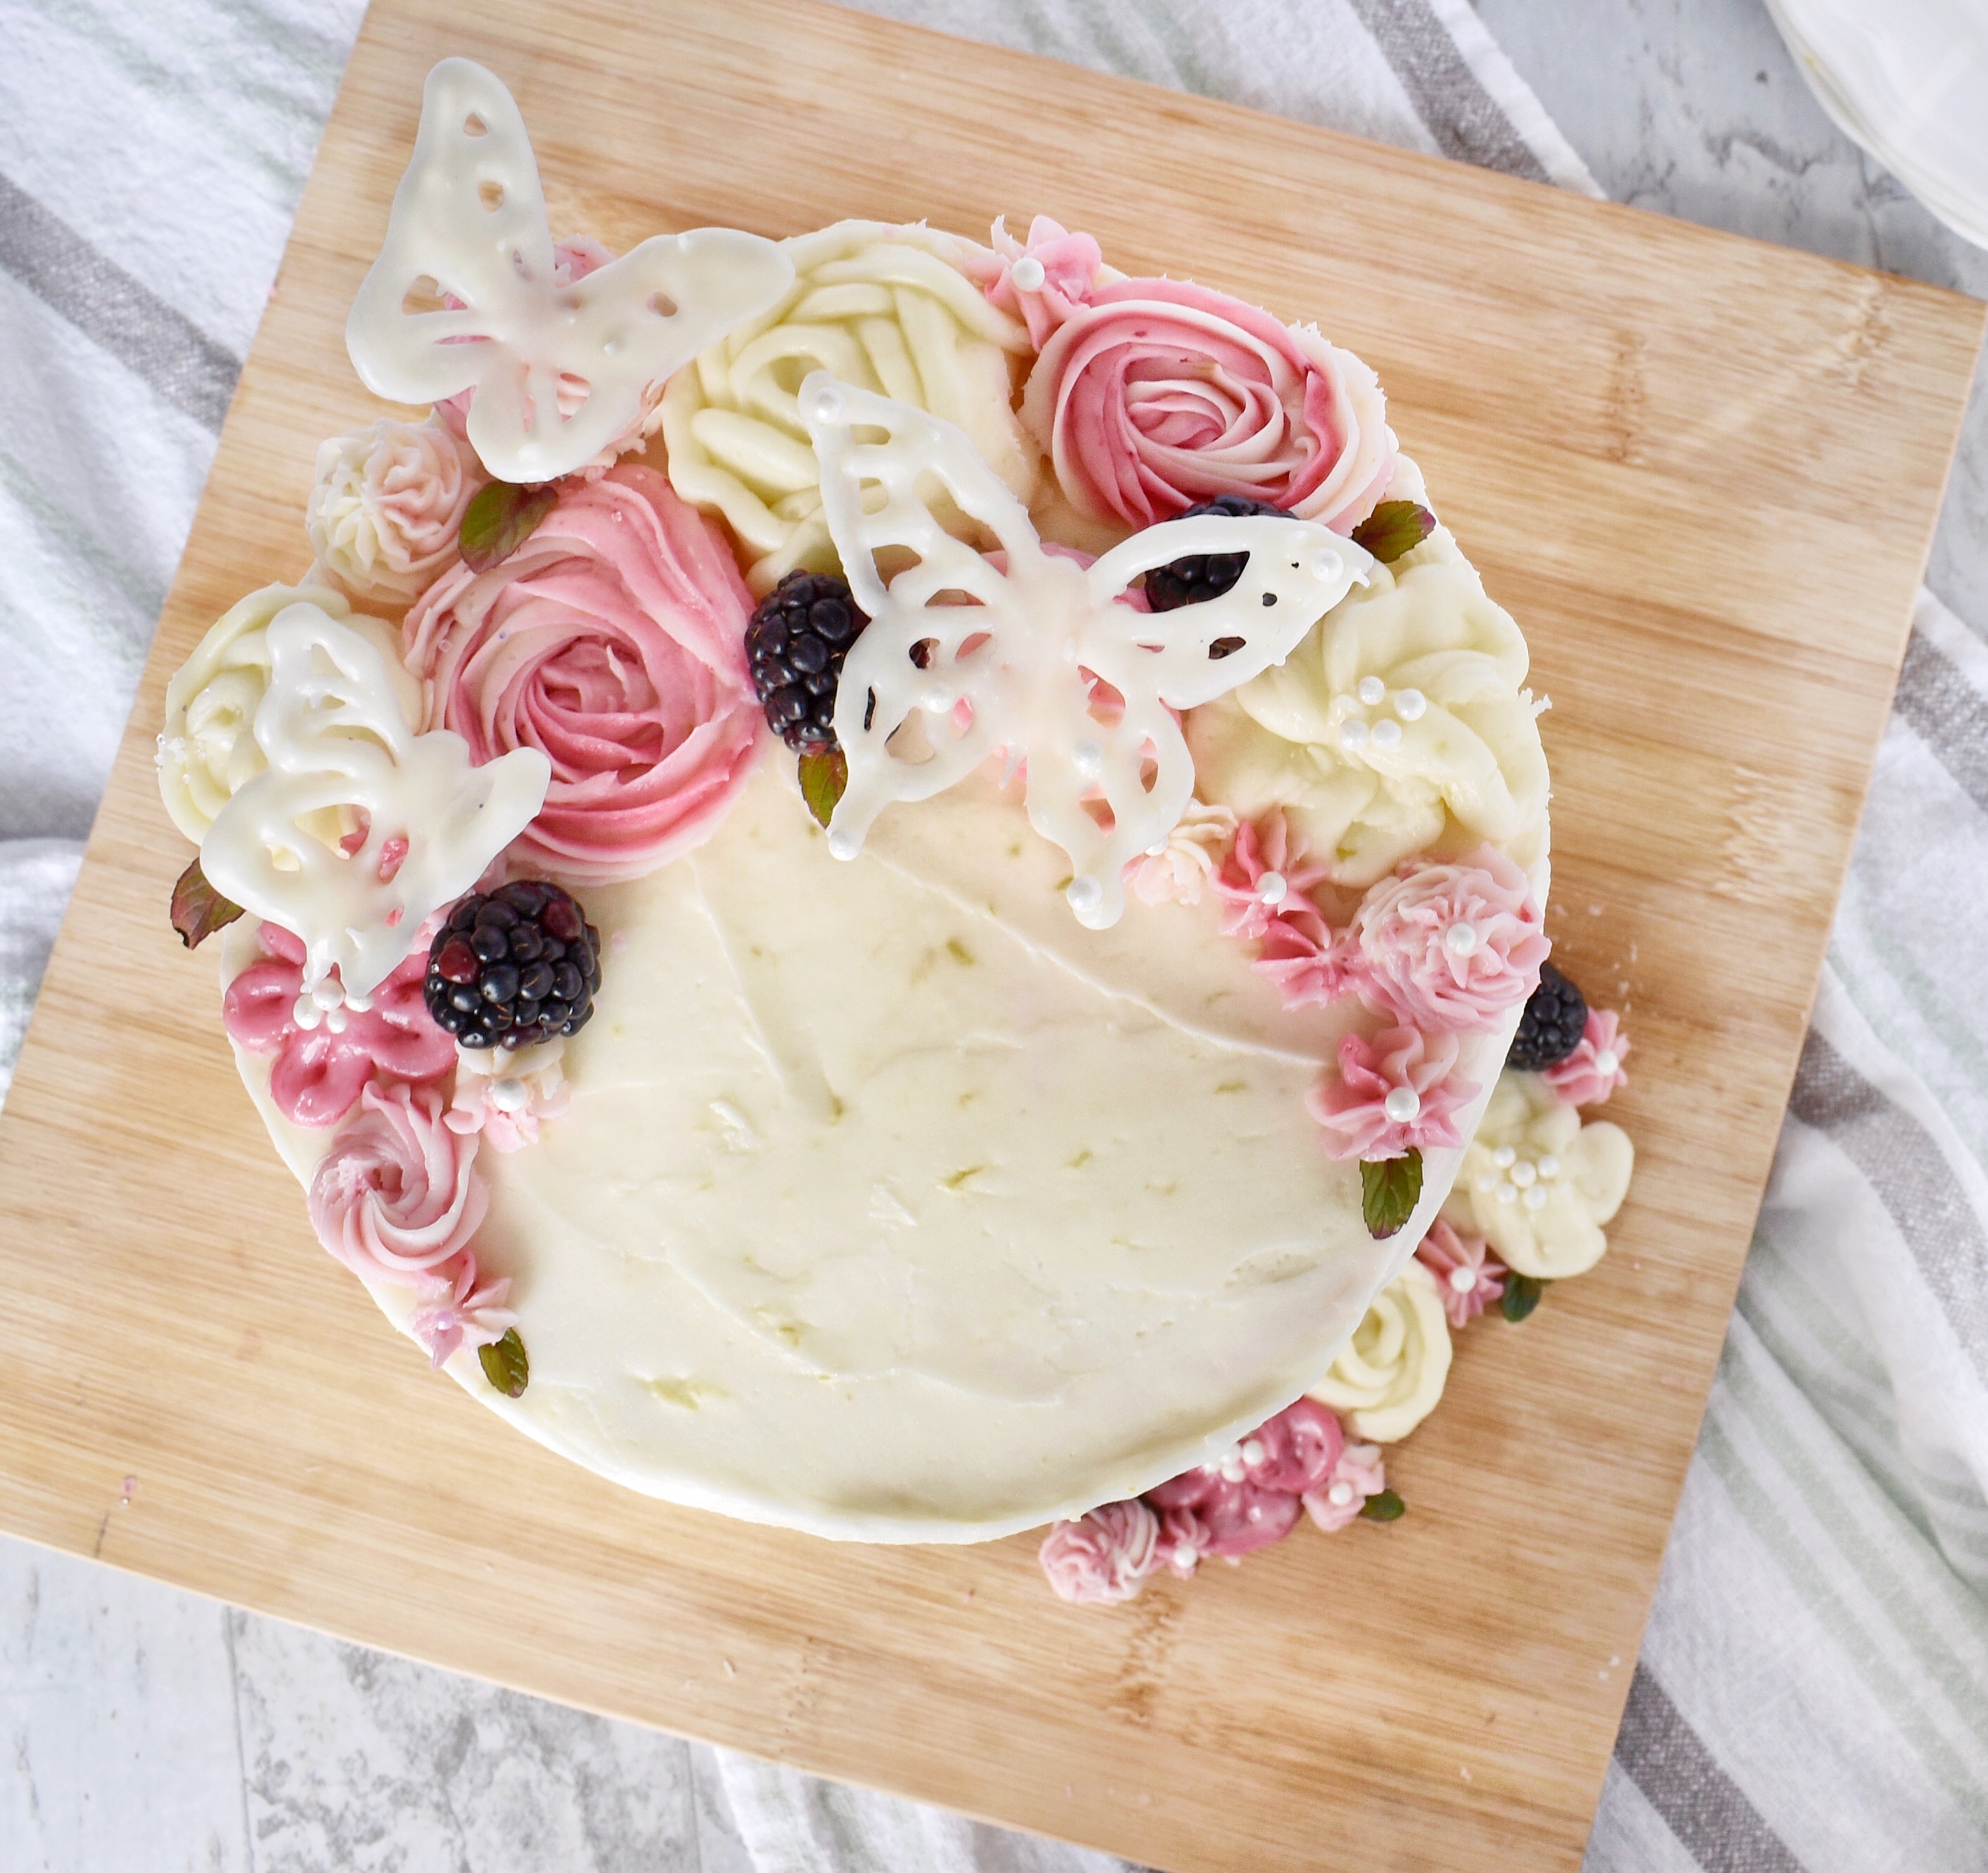 blackberry lemon poppyseed cake topped with frosting flowers and white chocolate butterflies